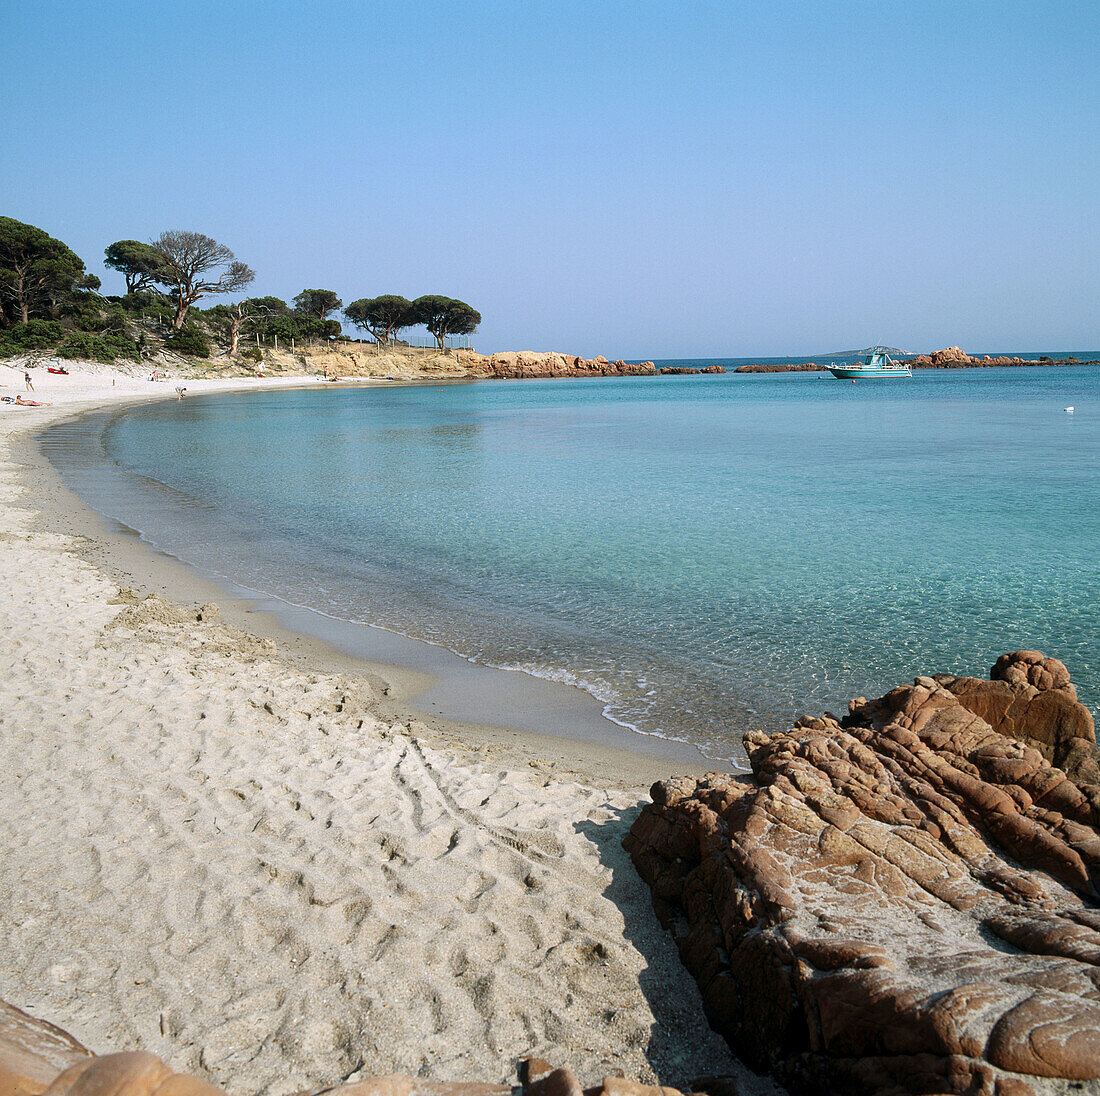 Beach of Palombaggia, Corsica, France